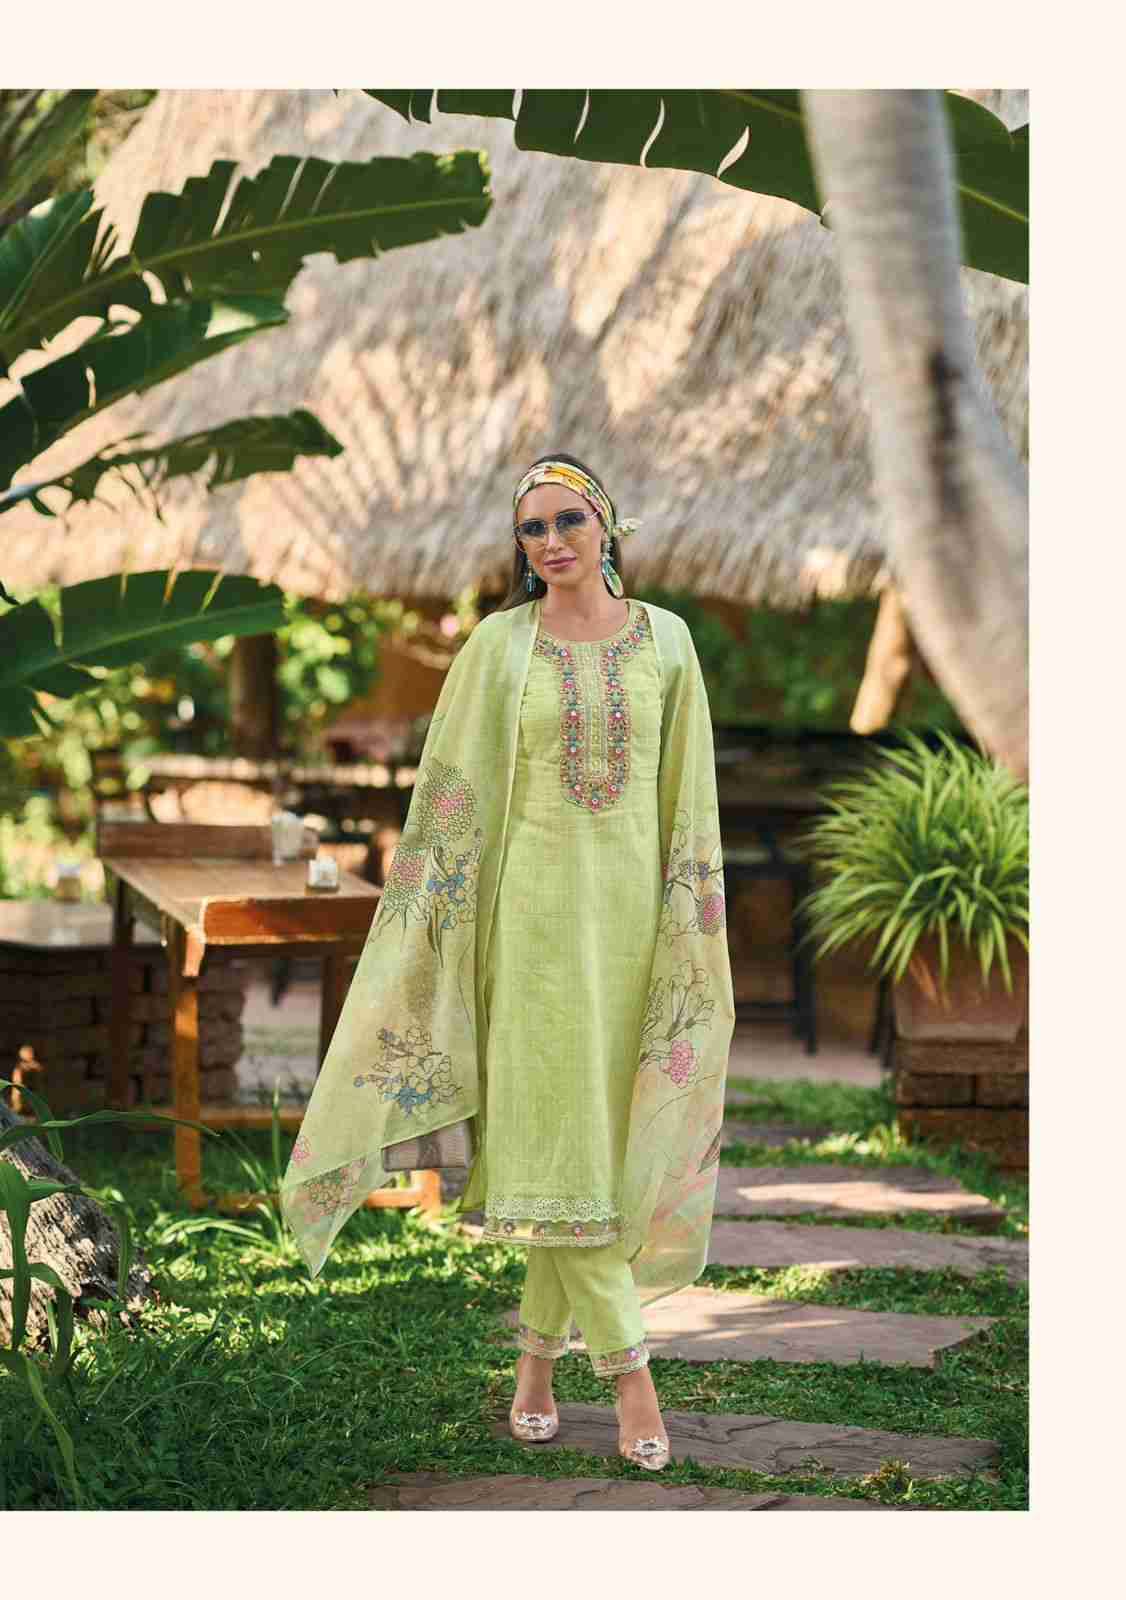 Summer Garden By Kailee 42631 To 42636 Series Designer Festive Suits Collection Beautiful Stylish Fancy Colorful Party Wear & Occasional Wear Pure Cotton Embroidered Dresses At Wholesale Price